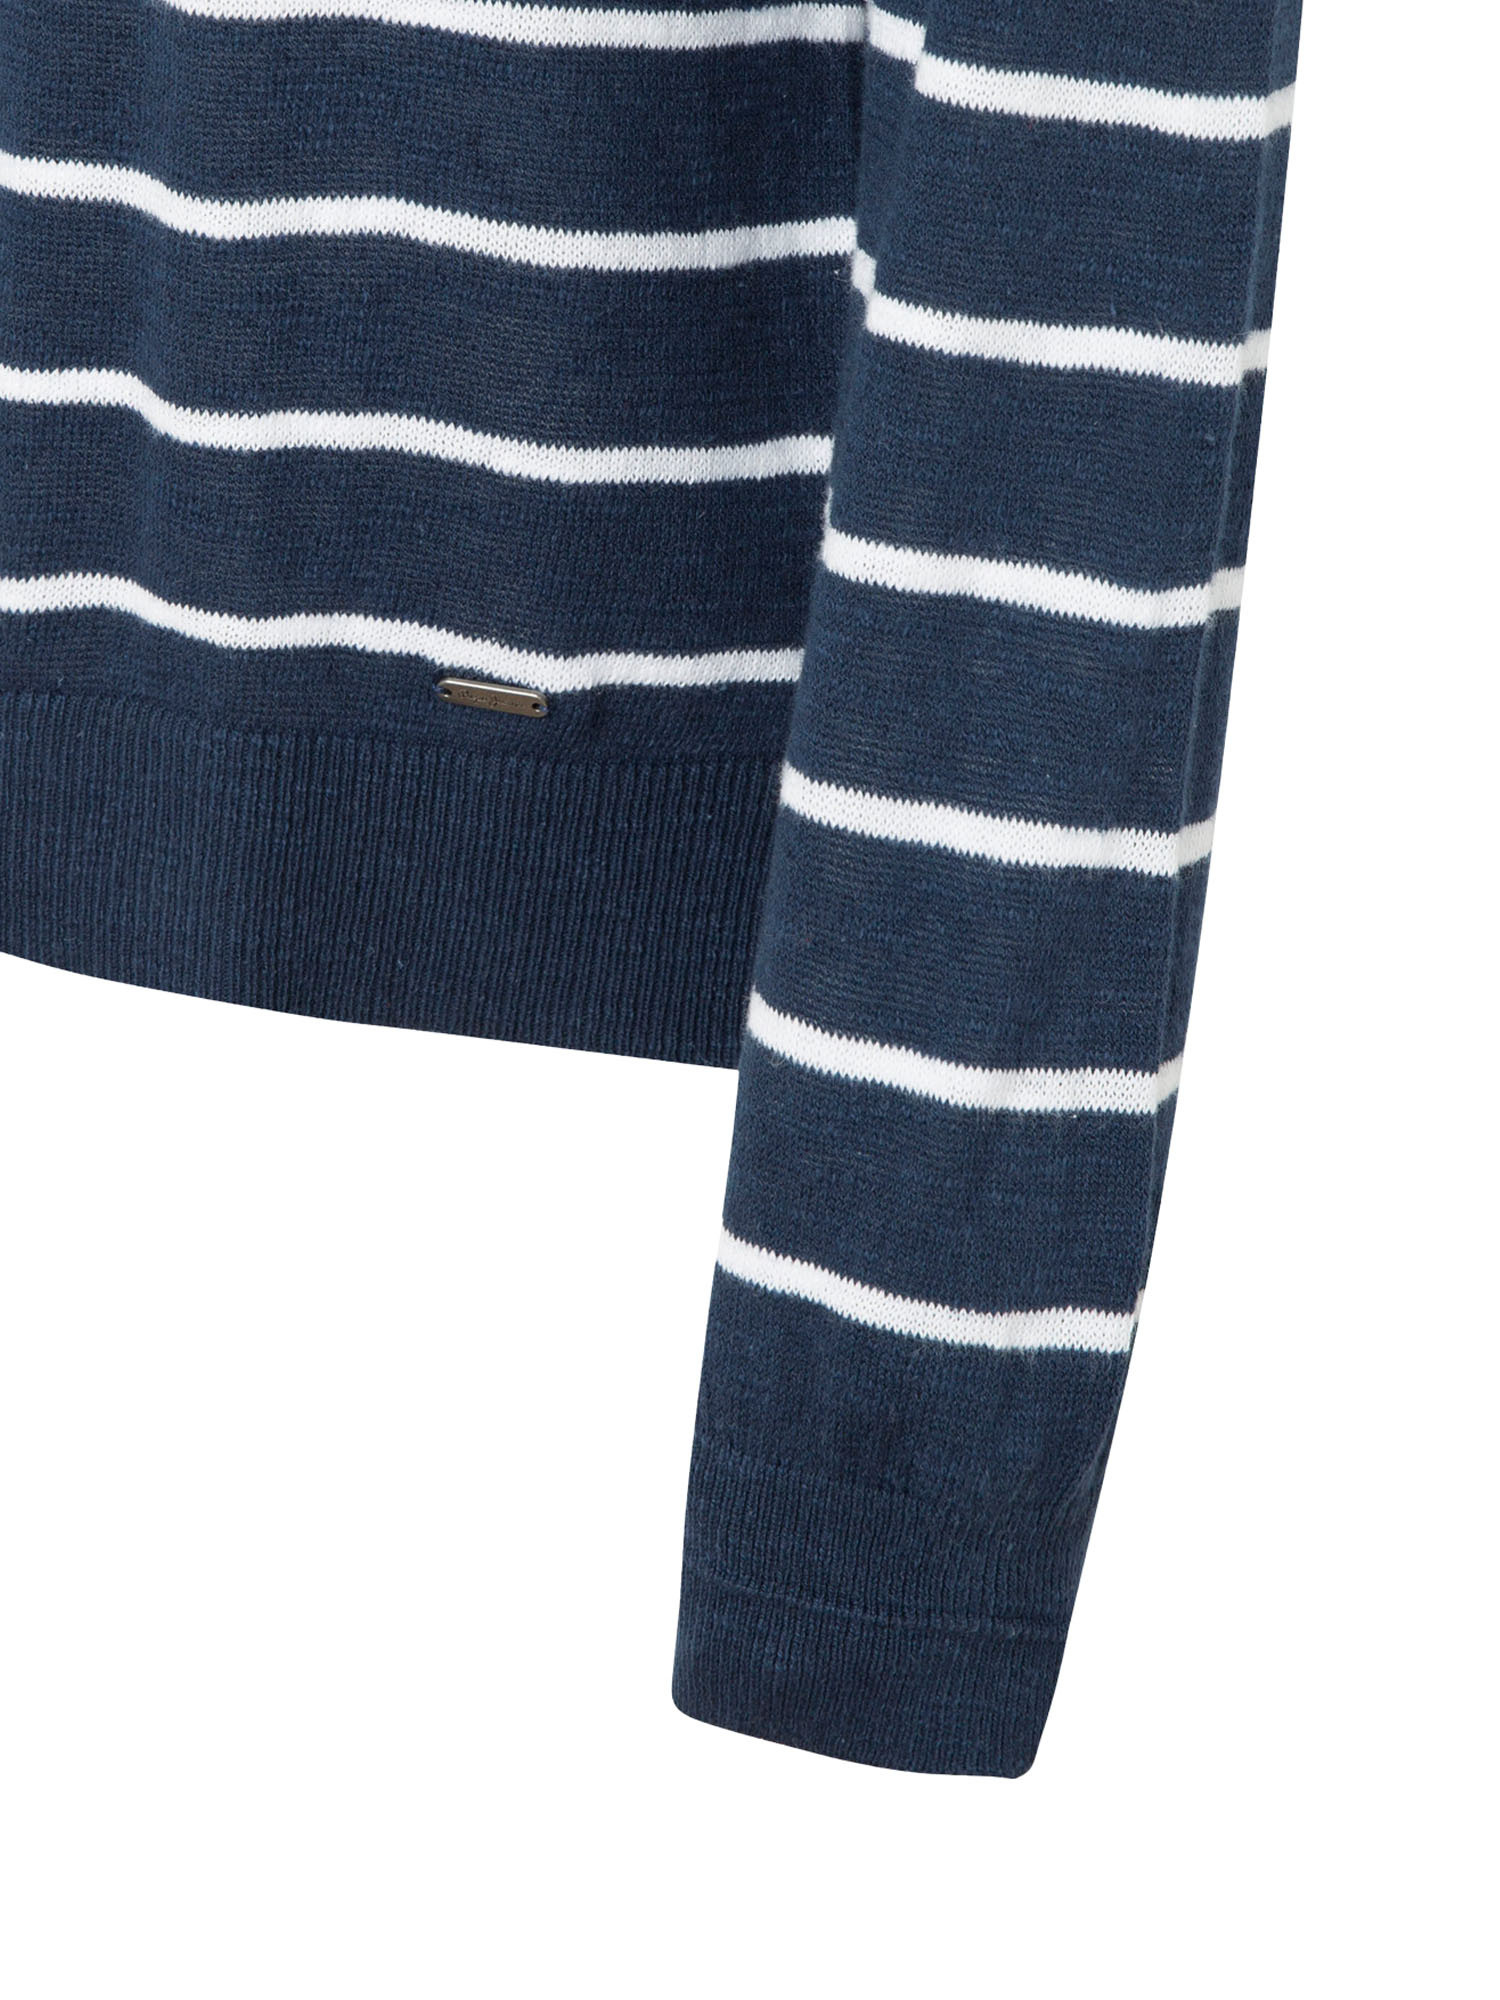 Pepe Jeans - Striped pullover, Dark Blue, large image number 2